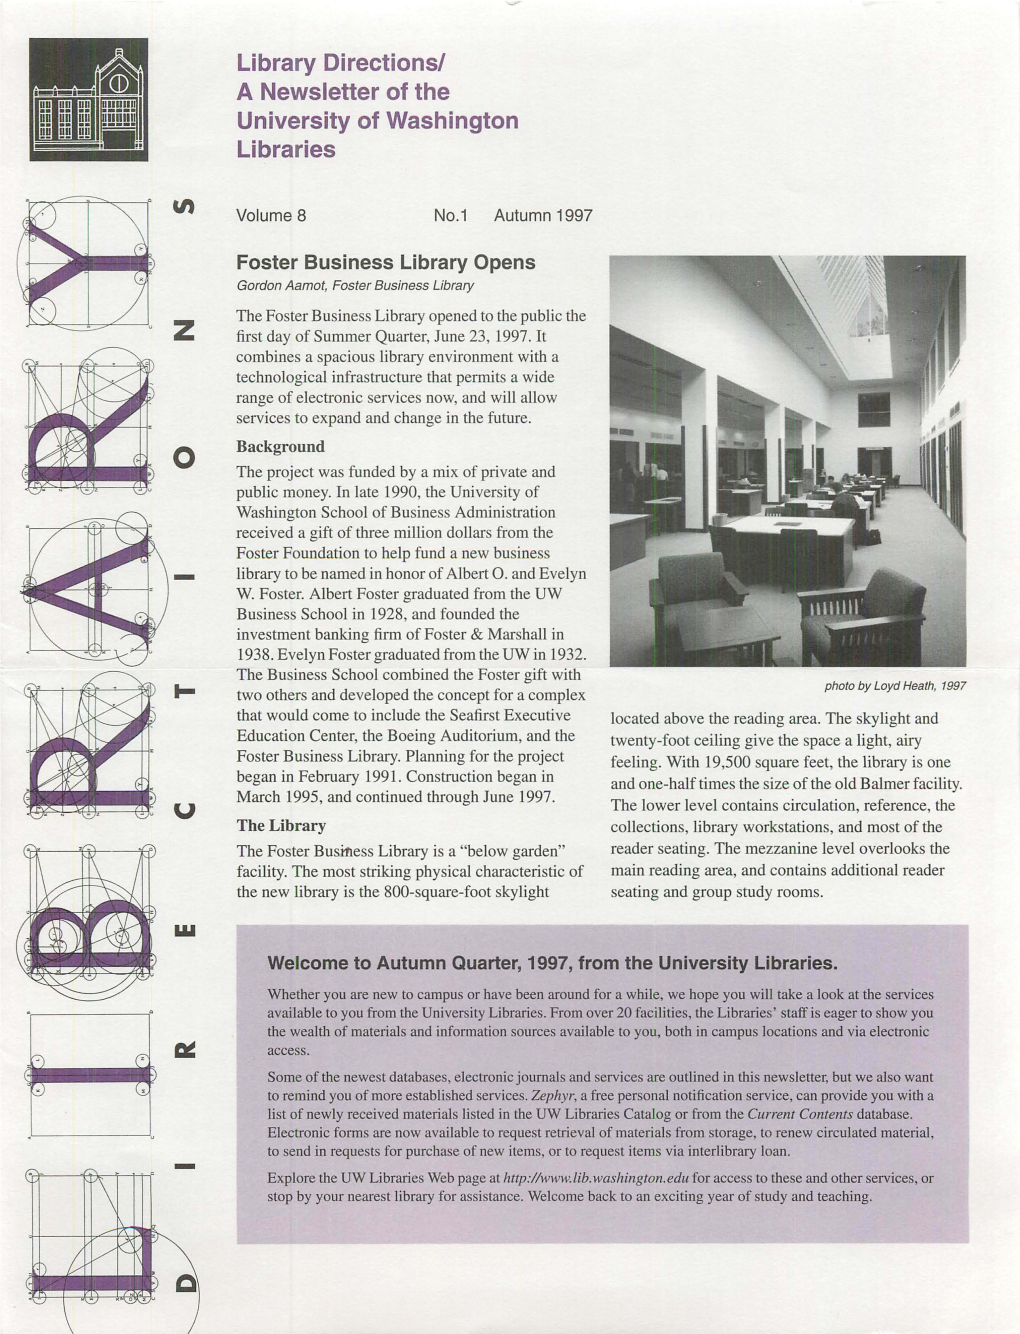 Library Directionsl a Newsletter of the University of Washington Libraries